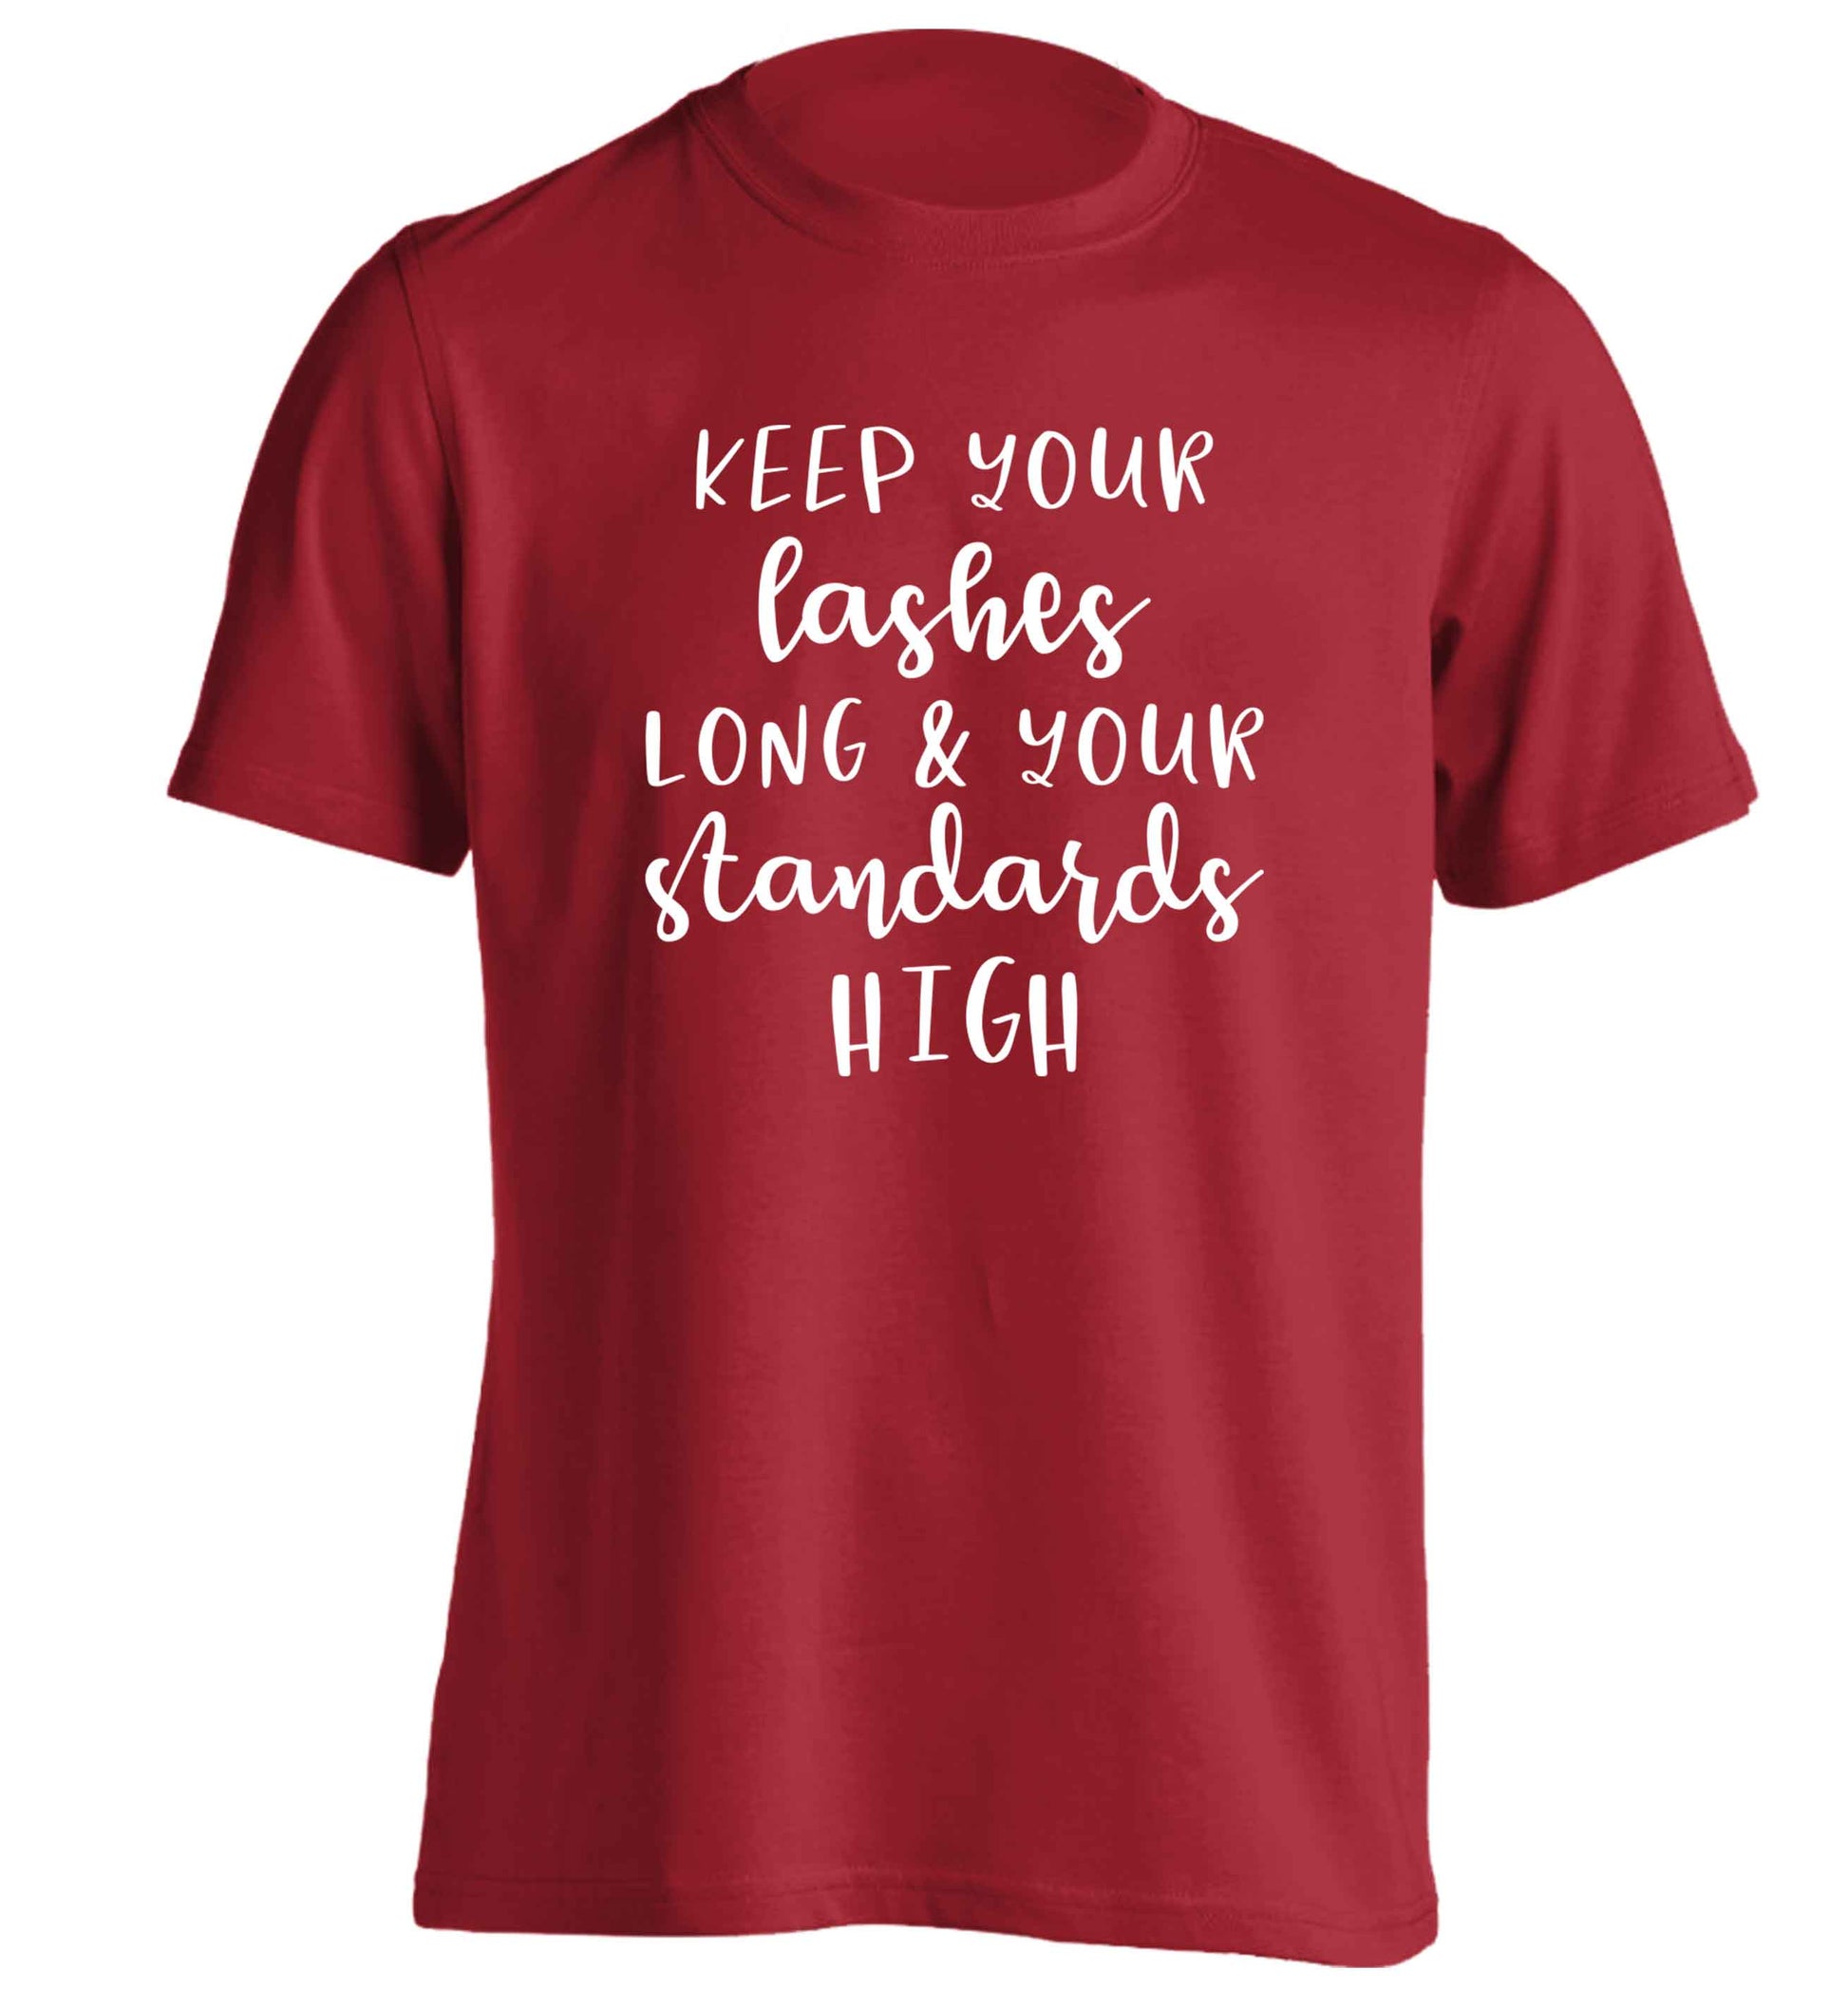 Keep your lashes long and your standards high adults unisex red Tshirt 2XL